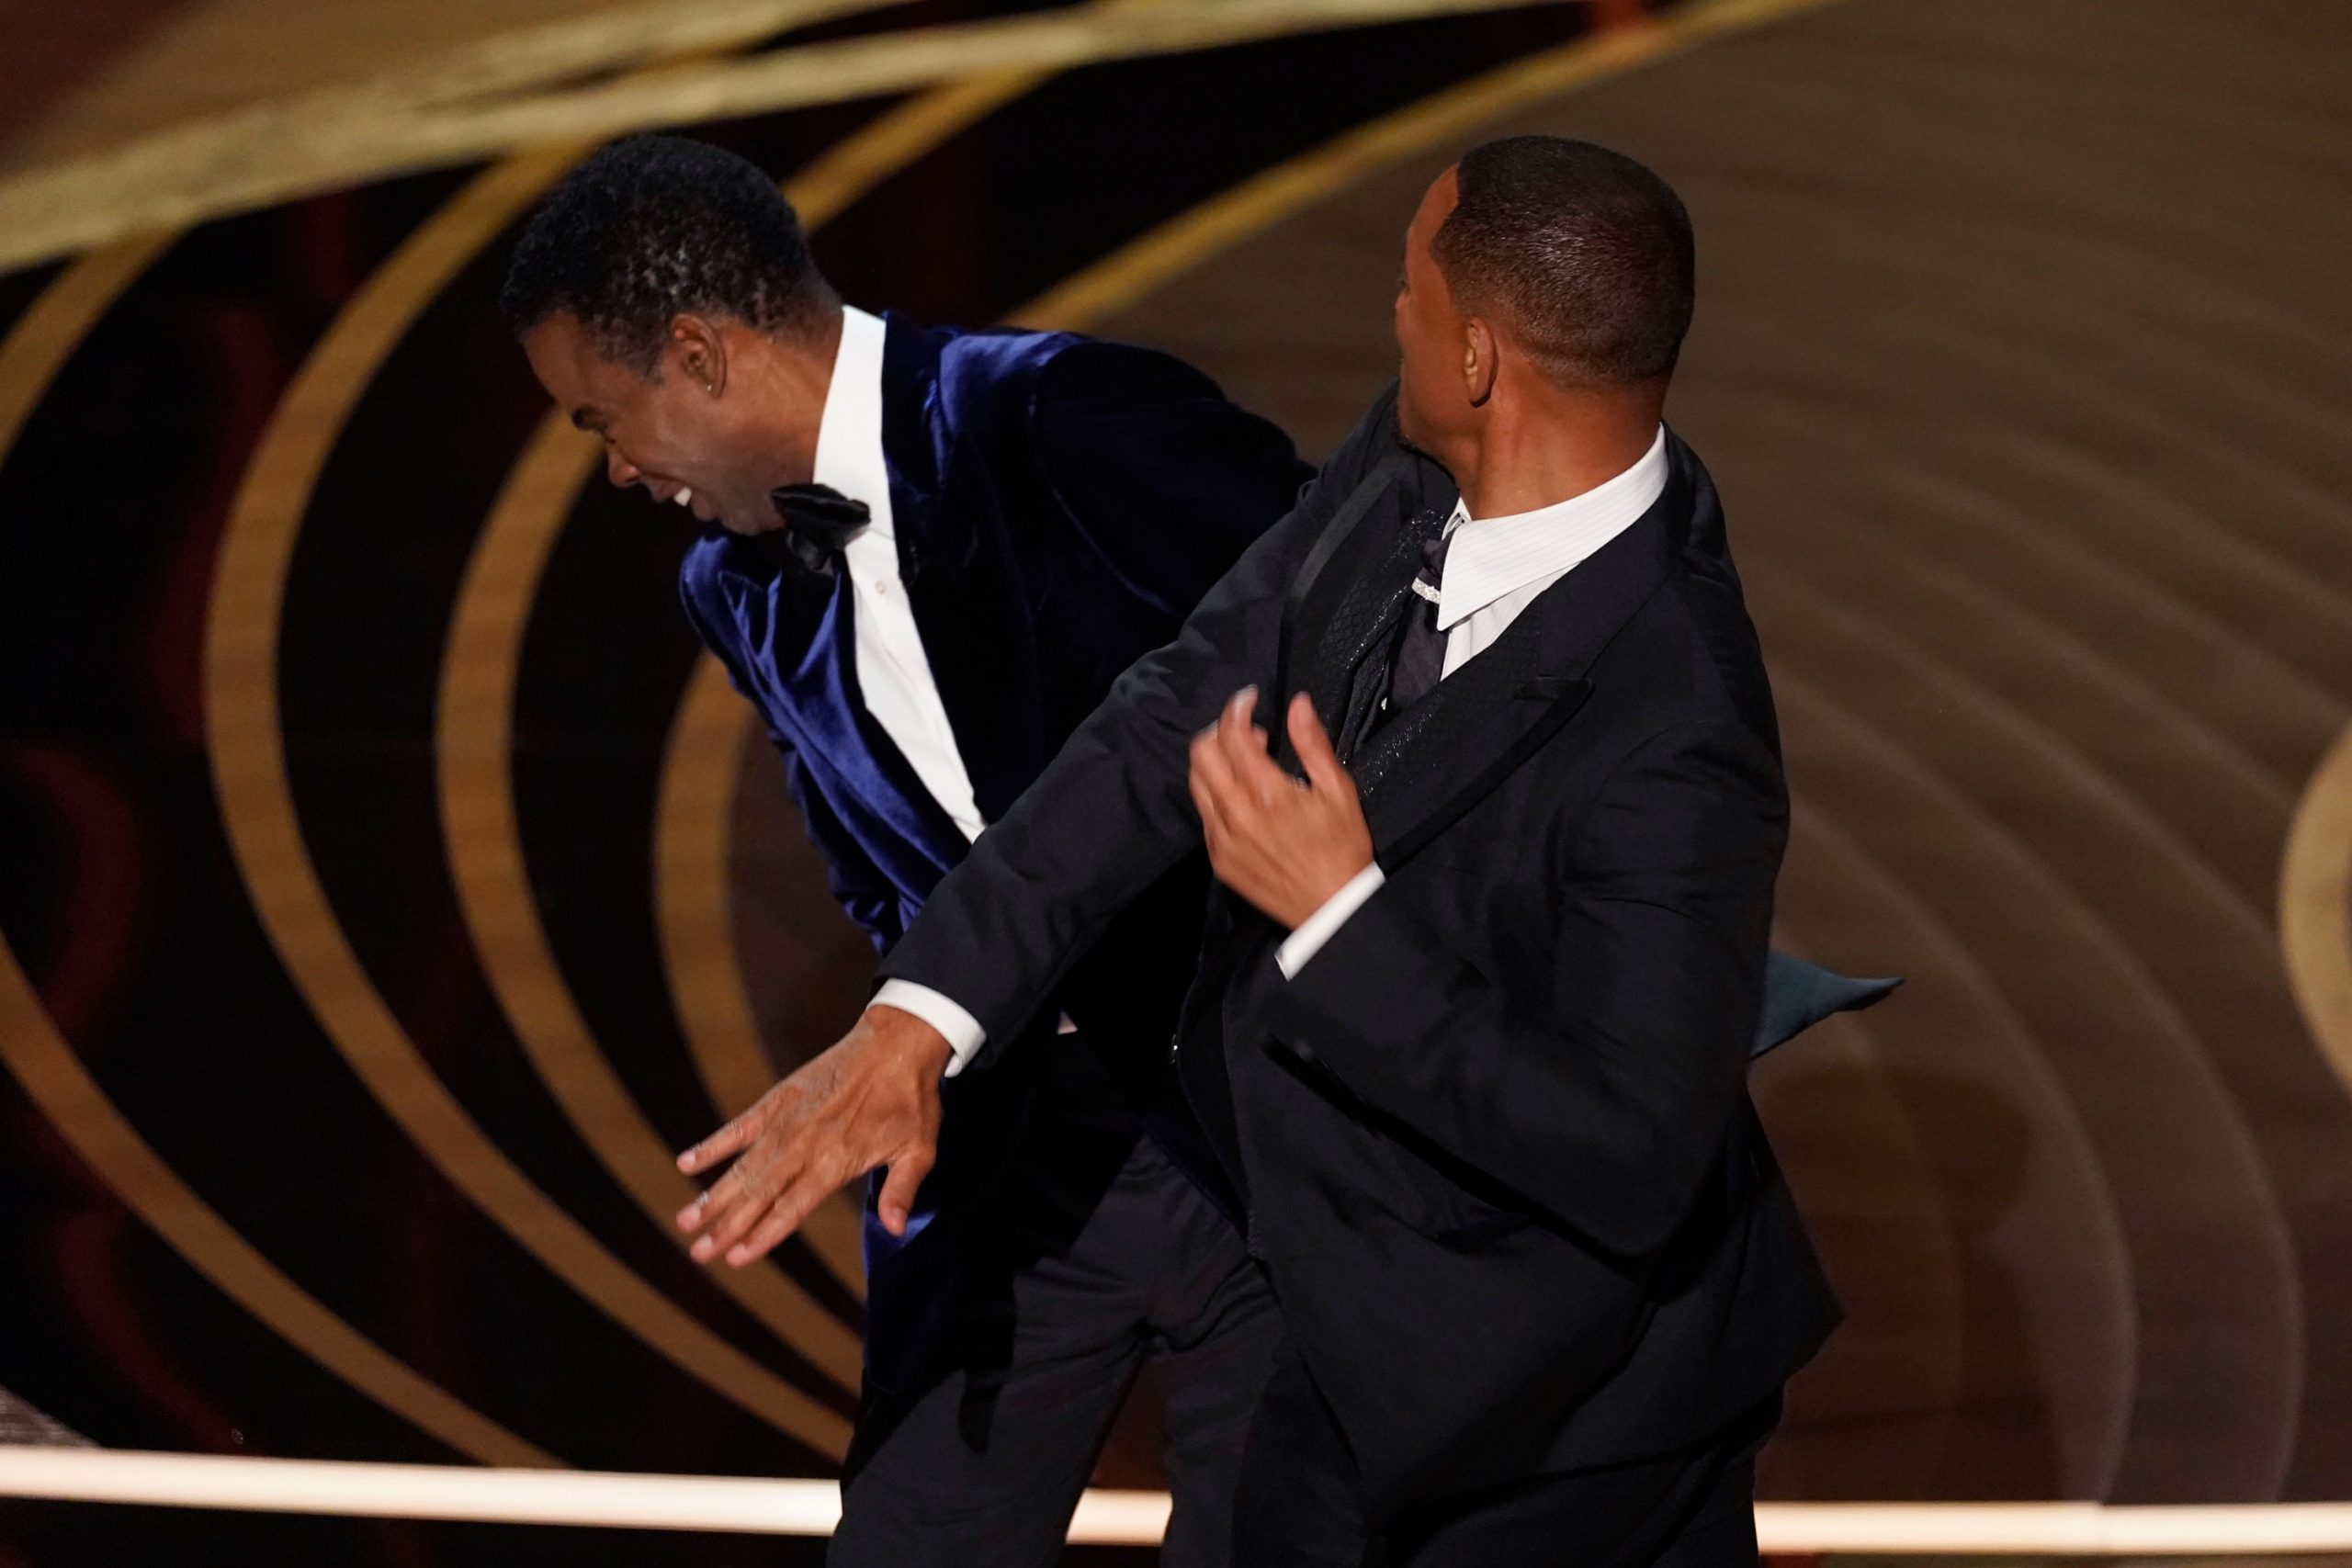 Cops were ready to arrest Will Smith after he slapped Chris Rock: Oscars producer